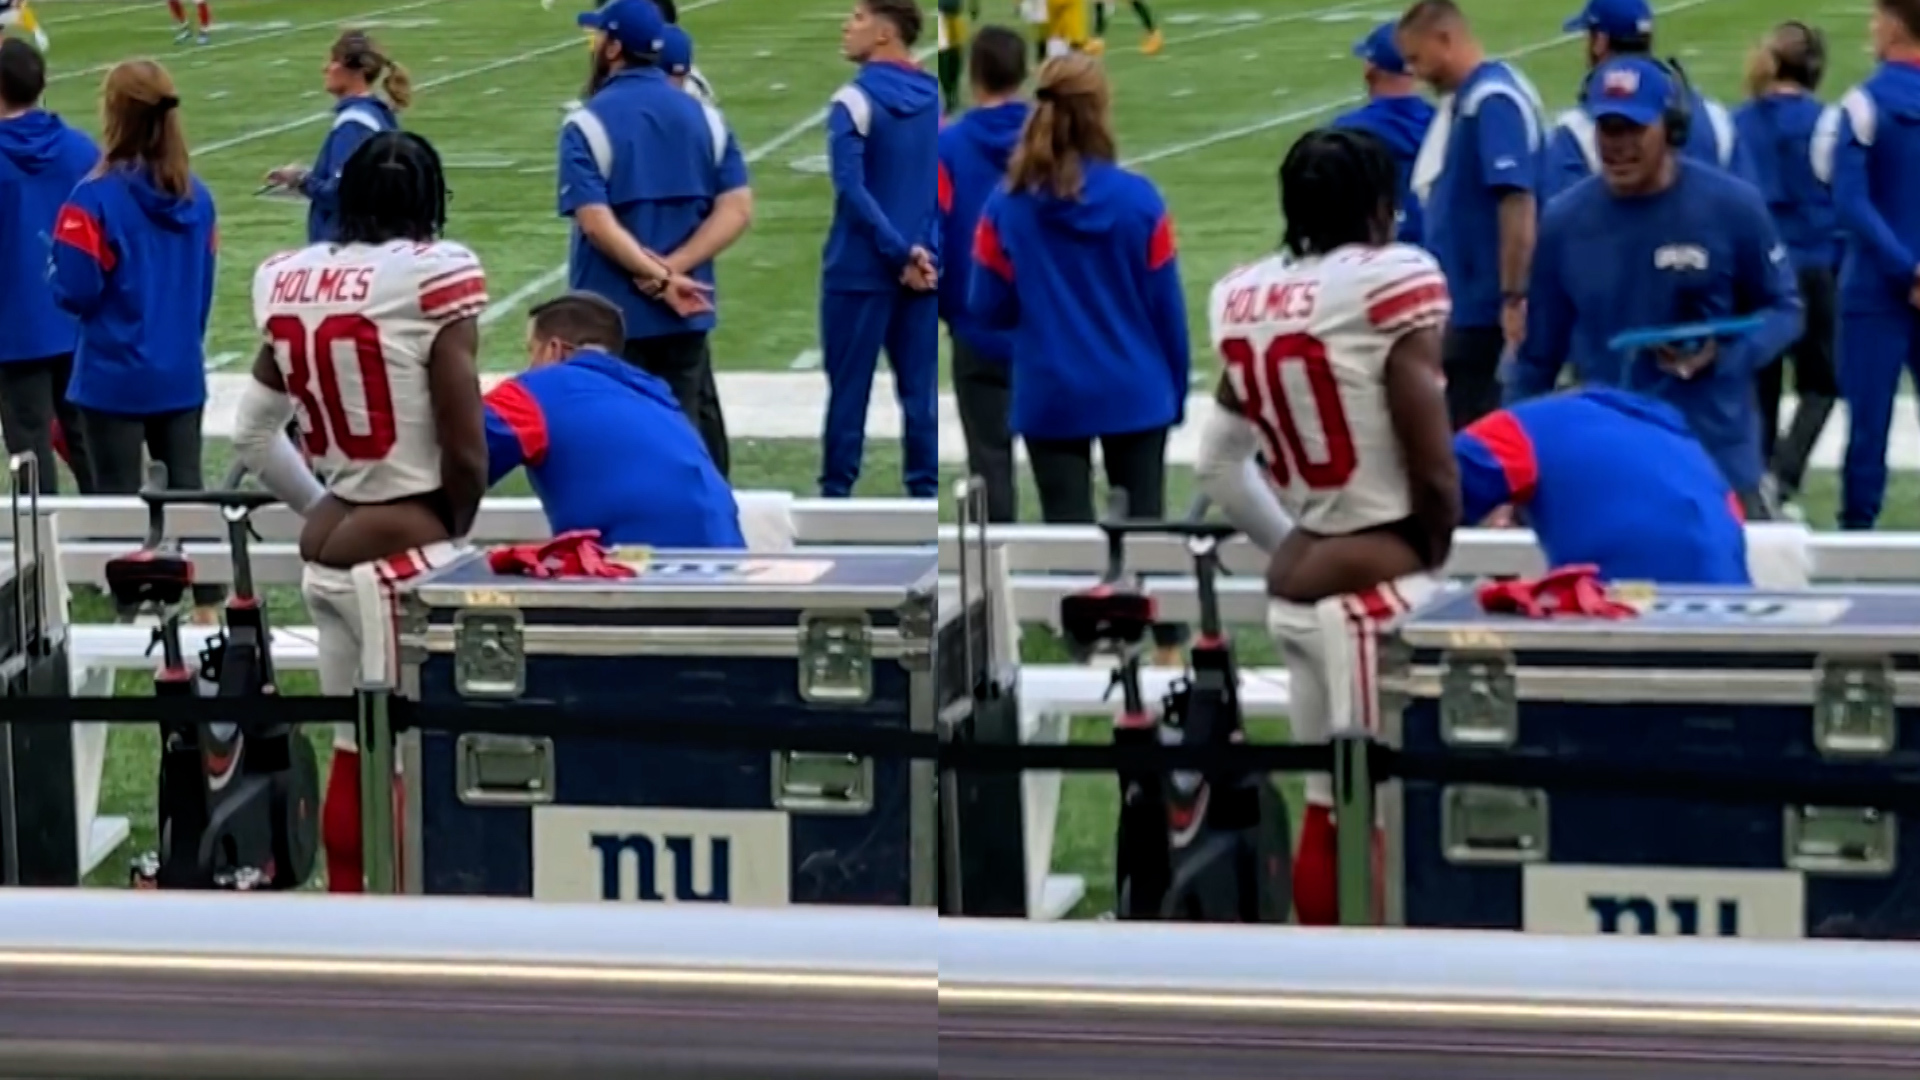 Darnay Holmes exposes his bum for treatment during London NFL game, it looks weirdly sexual